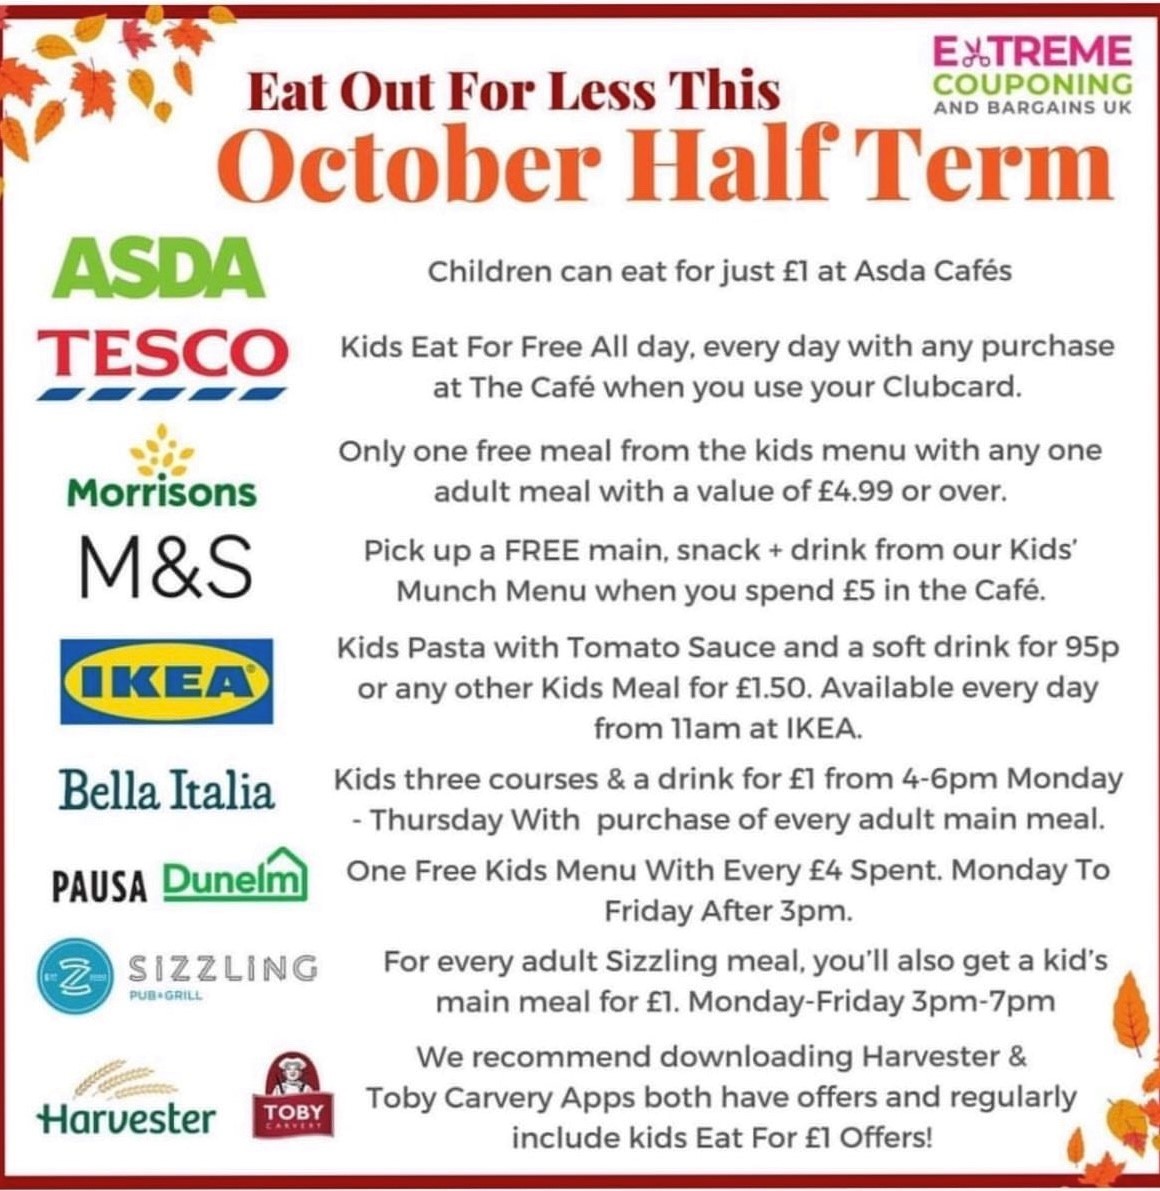 Here are some amazing ways you can save money this Half Term